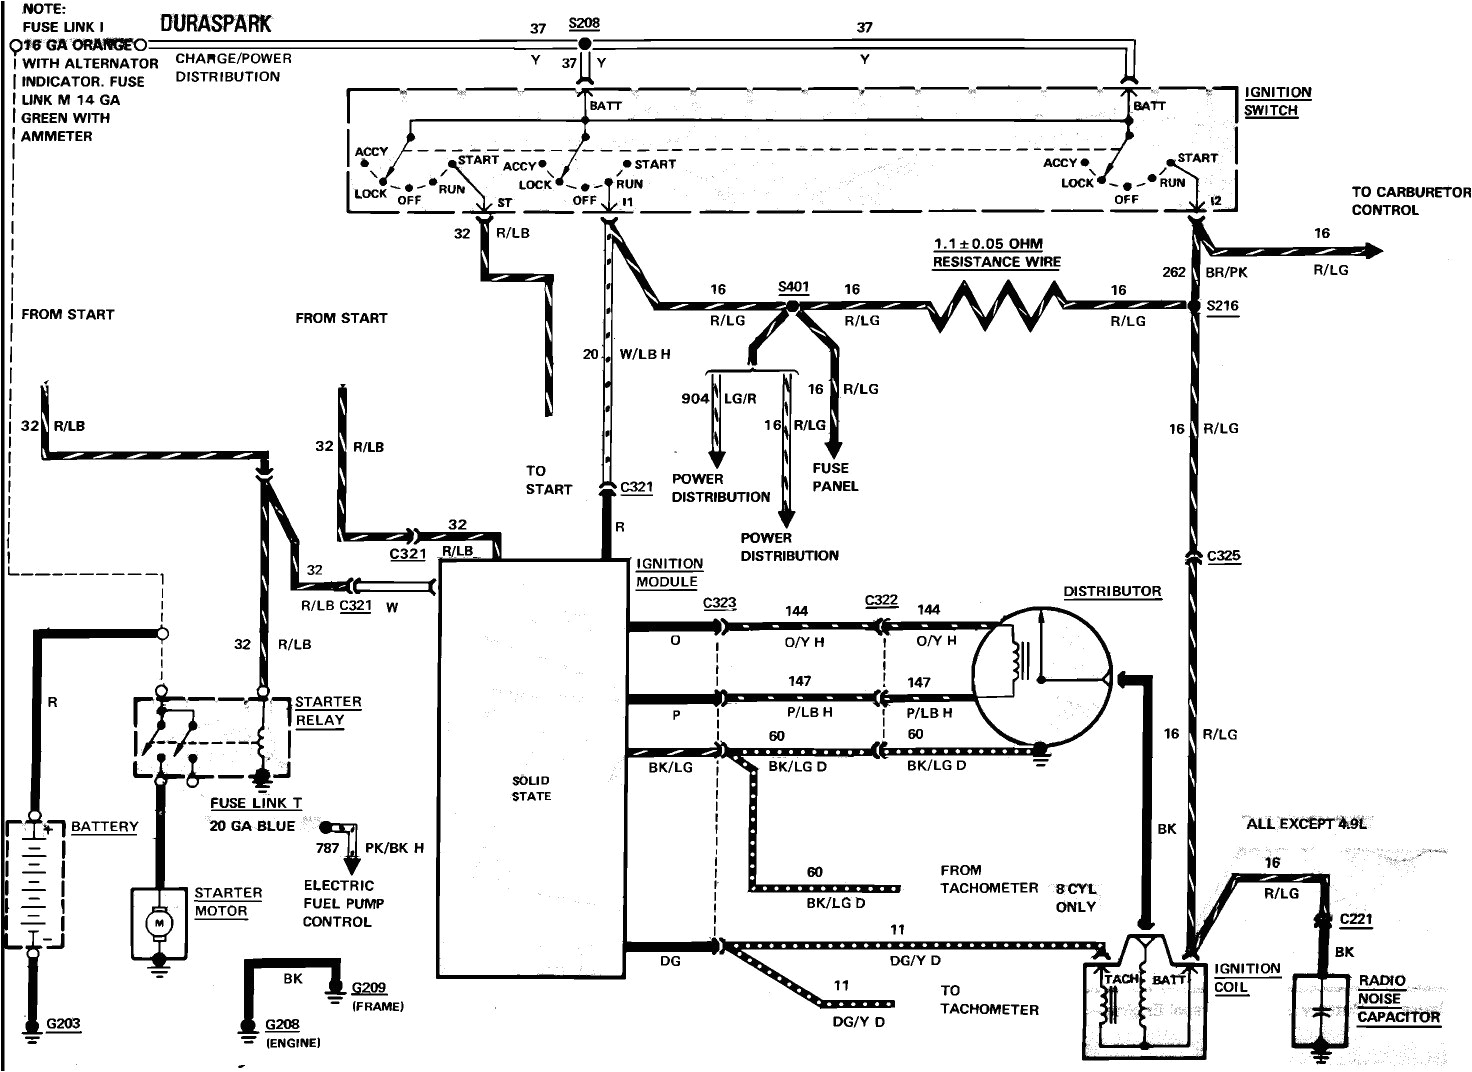 automotive wiring diagrams page 147 of 301 wiring diagrams data diagrams archives page 94 of 301 automotive wiring diagrams